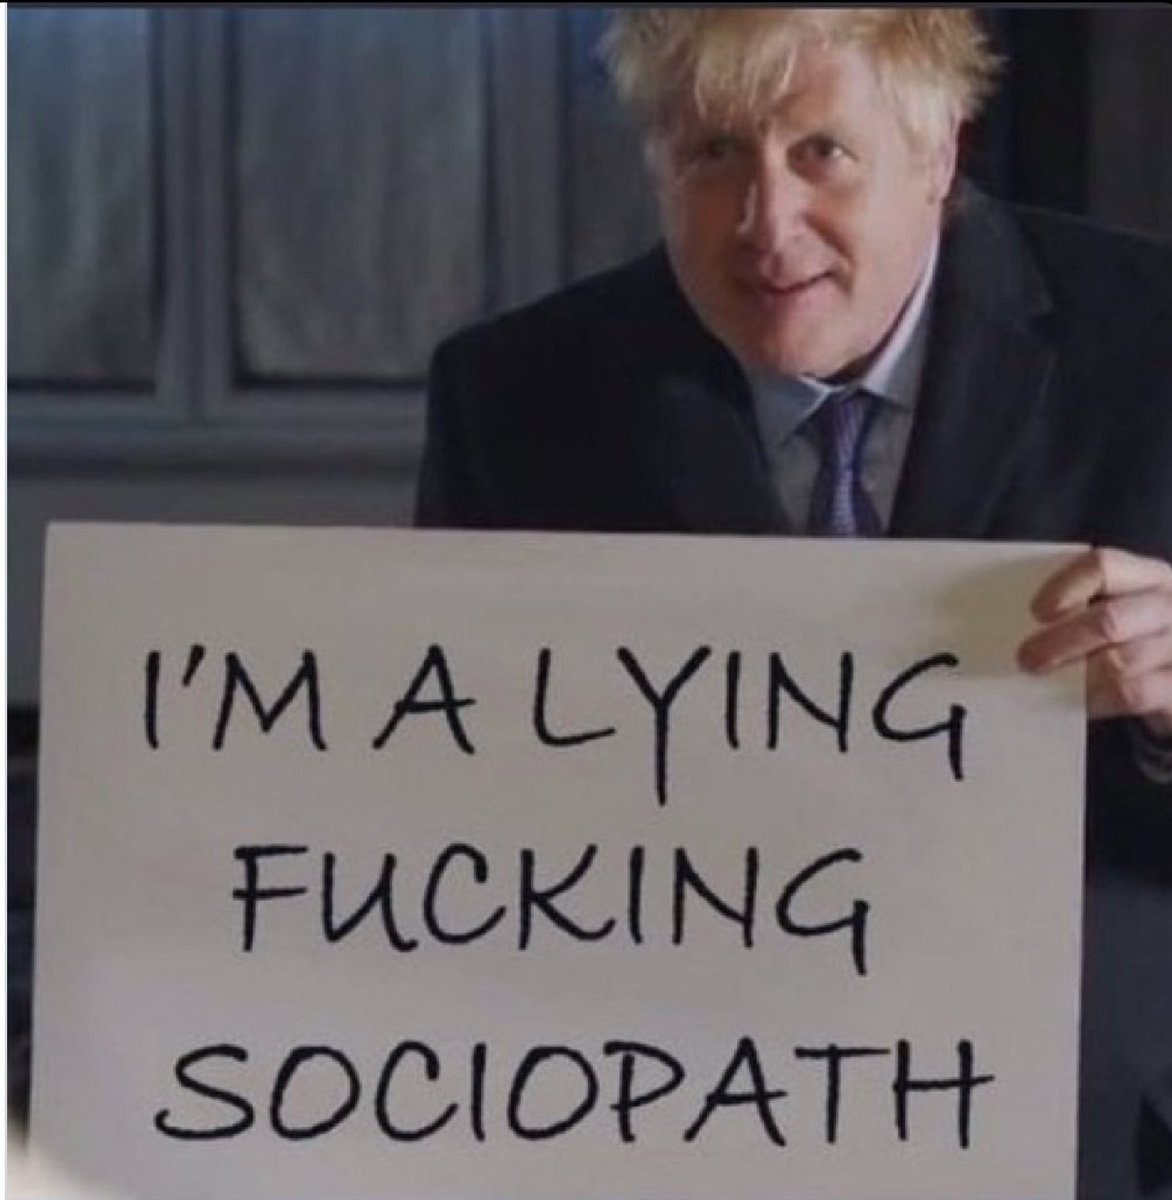 #LiarJohnson #ToryCriminalsUnfitToGovern #ToriesPartiedPeopleDied #ToriesLiedPeopleDied #ToryCovidKillers #ToryPPECorruption #ToriesDestroyingOurCountry #ToriesCorruptToTheCore #ToriesDestroyingOurNHS #EnoughIsEnough #ToriesOut #GeneralElectionNow #StopVotingTory #RejoinEU